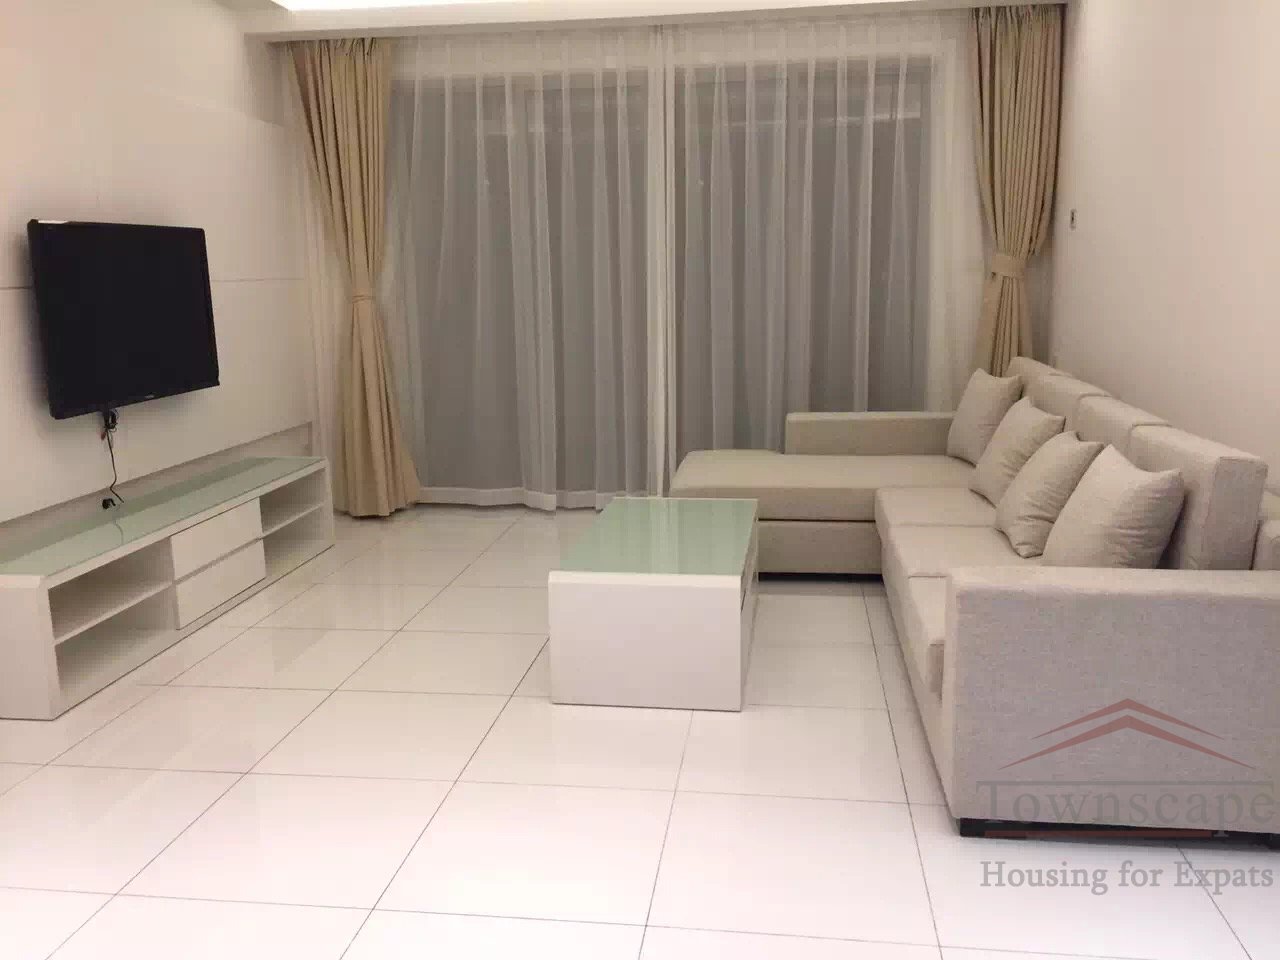 4br apartment for rent in shanghai Clean 4BR Family Apartment Apt in Oasis Riviera @Weining Road Metro, Changning